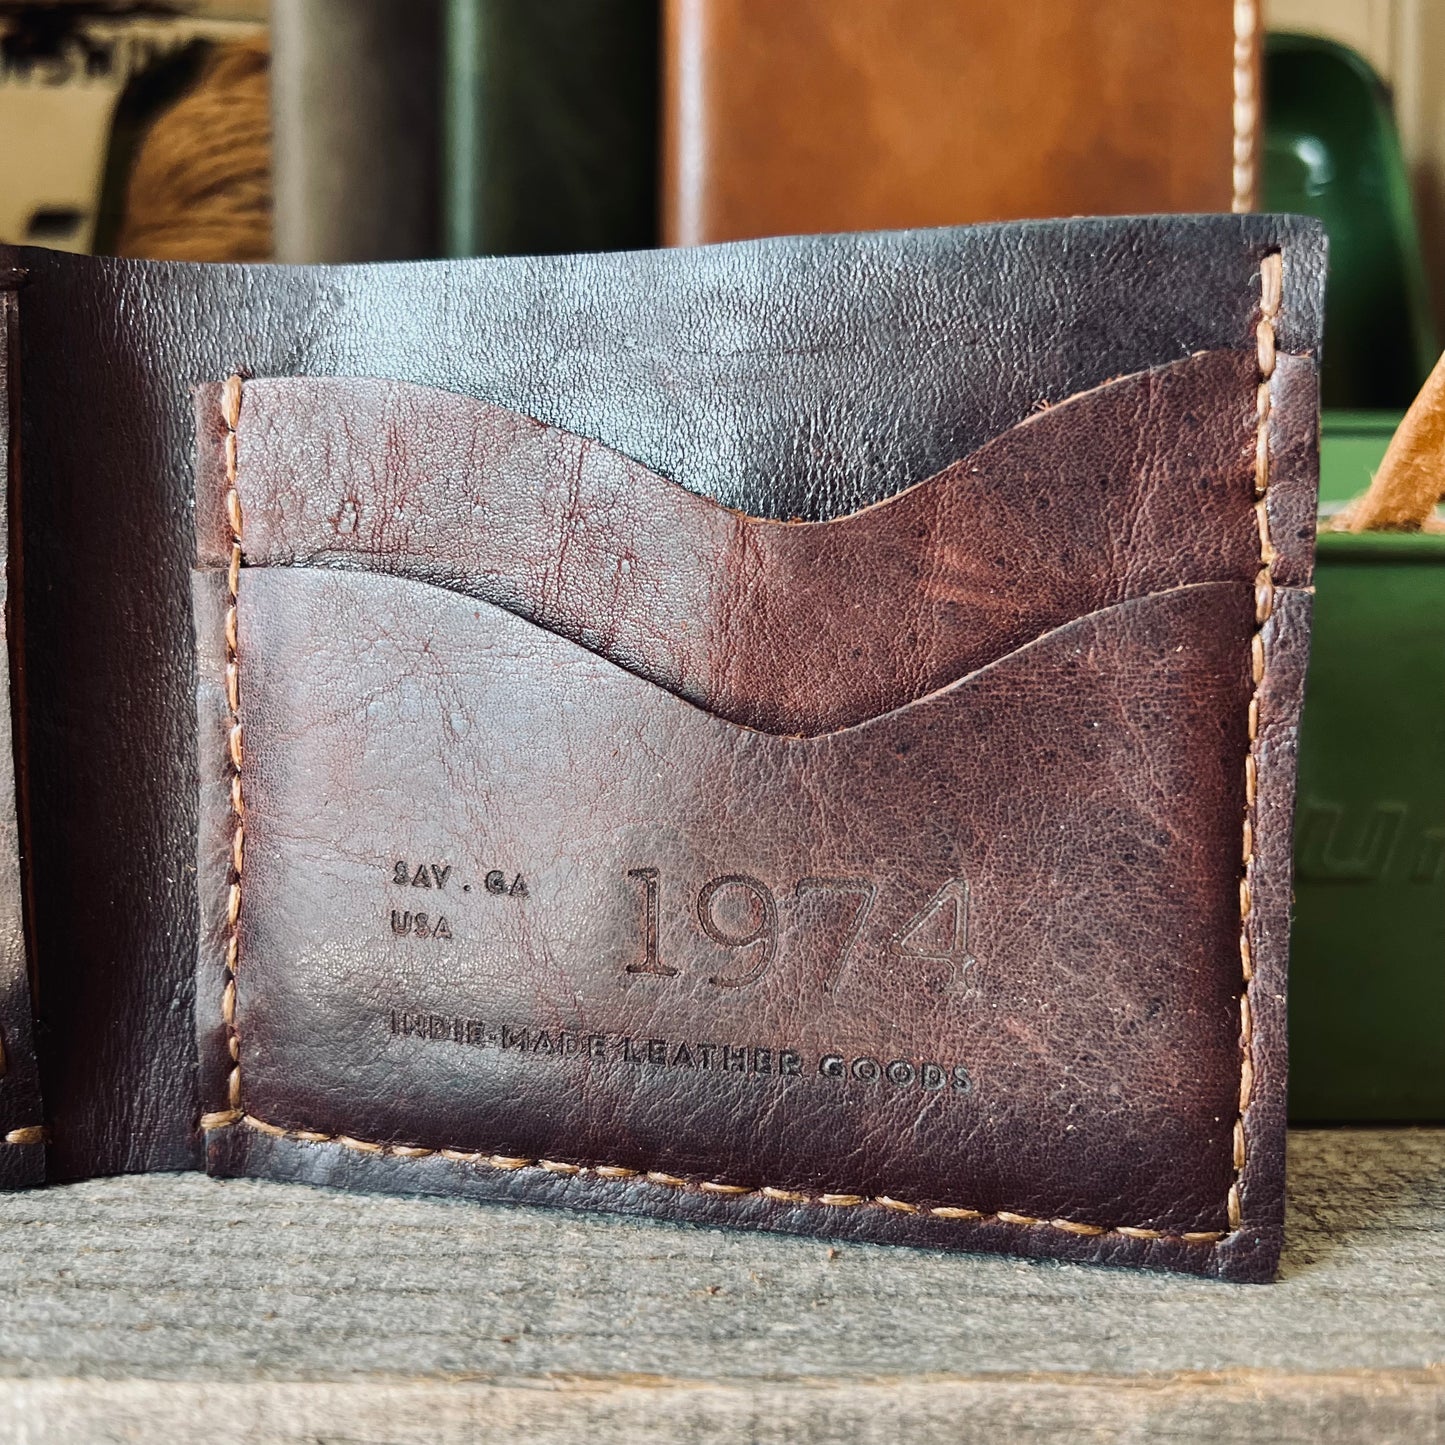 1974 Finnegan Leather Wallet Detail with Branded 1974 Logo